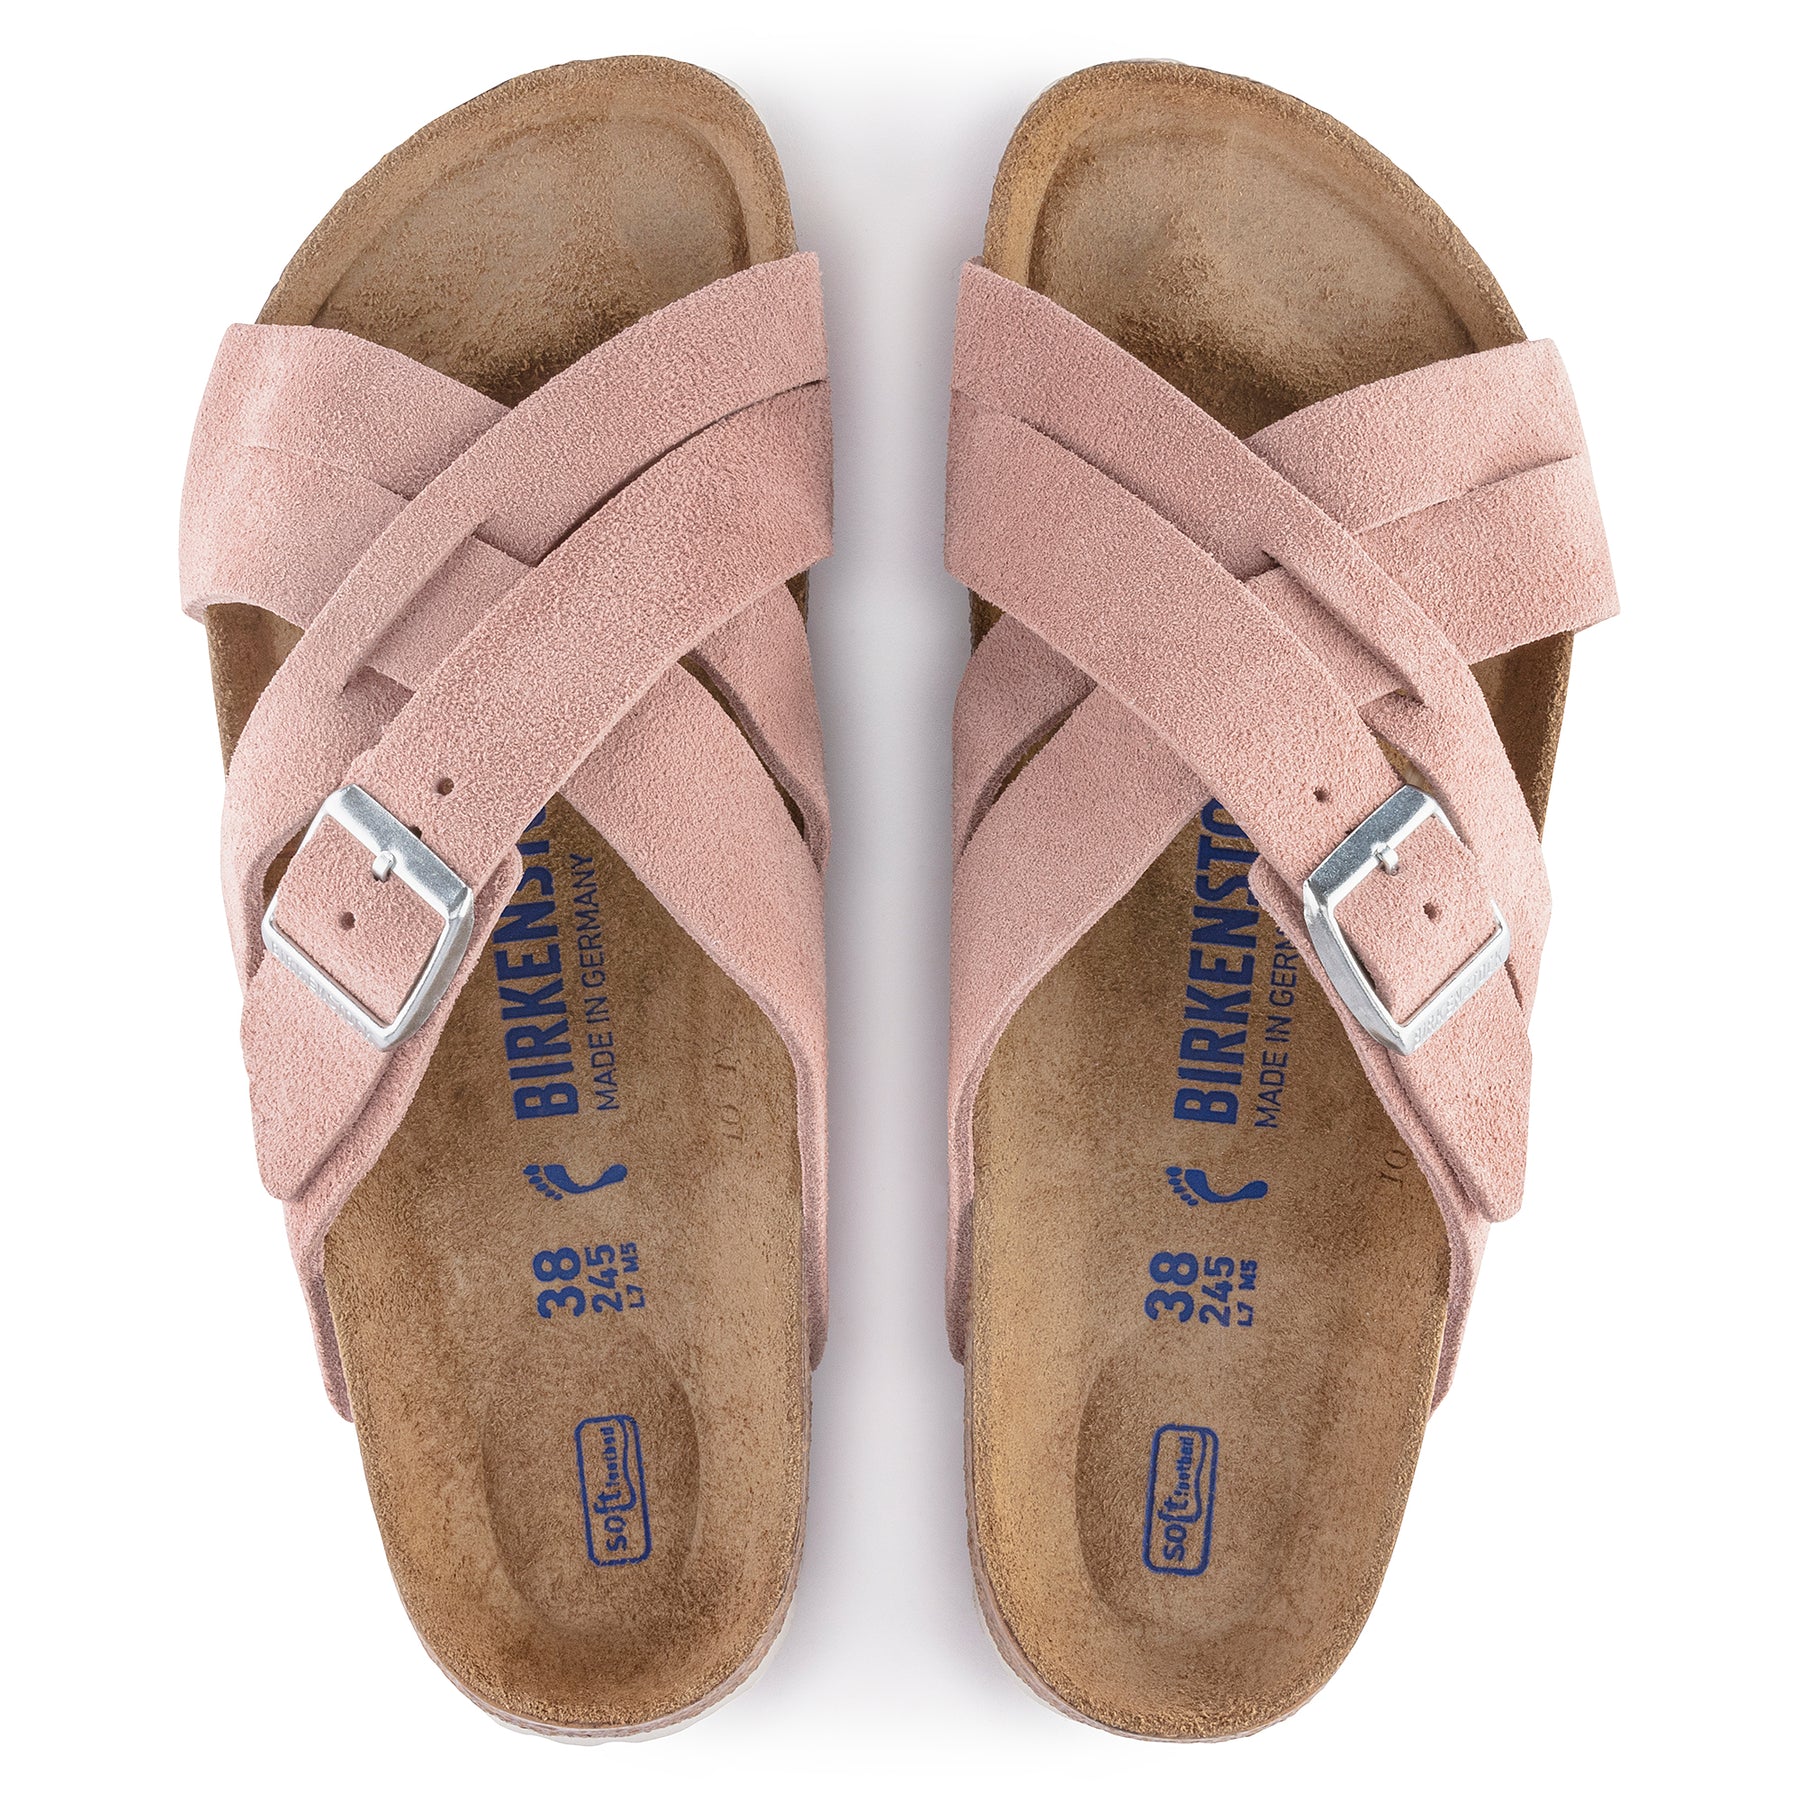 Birkenstock Limited Edition Lugano Soft Footbed pink clay suede